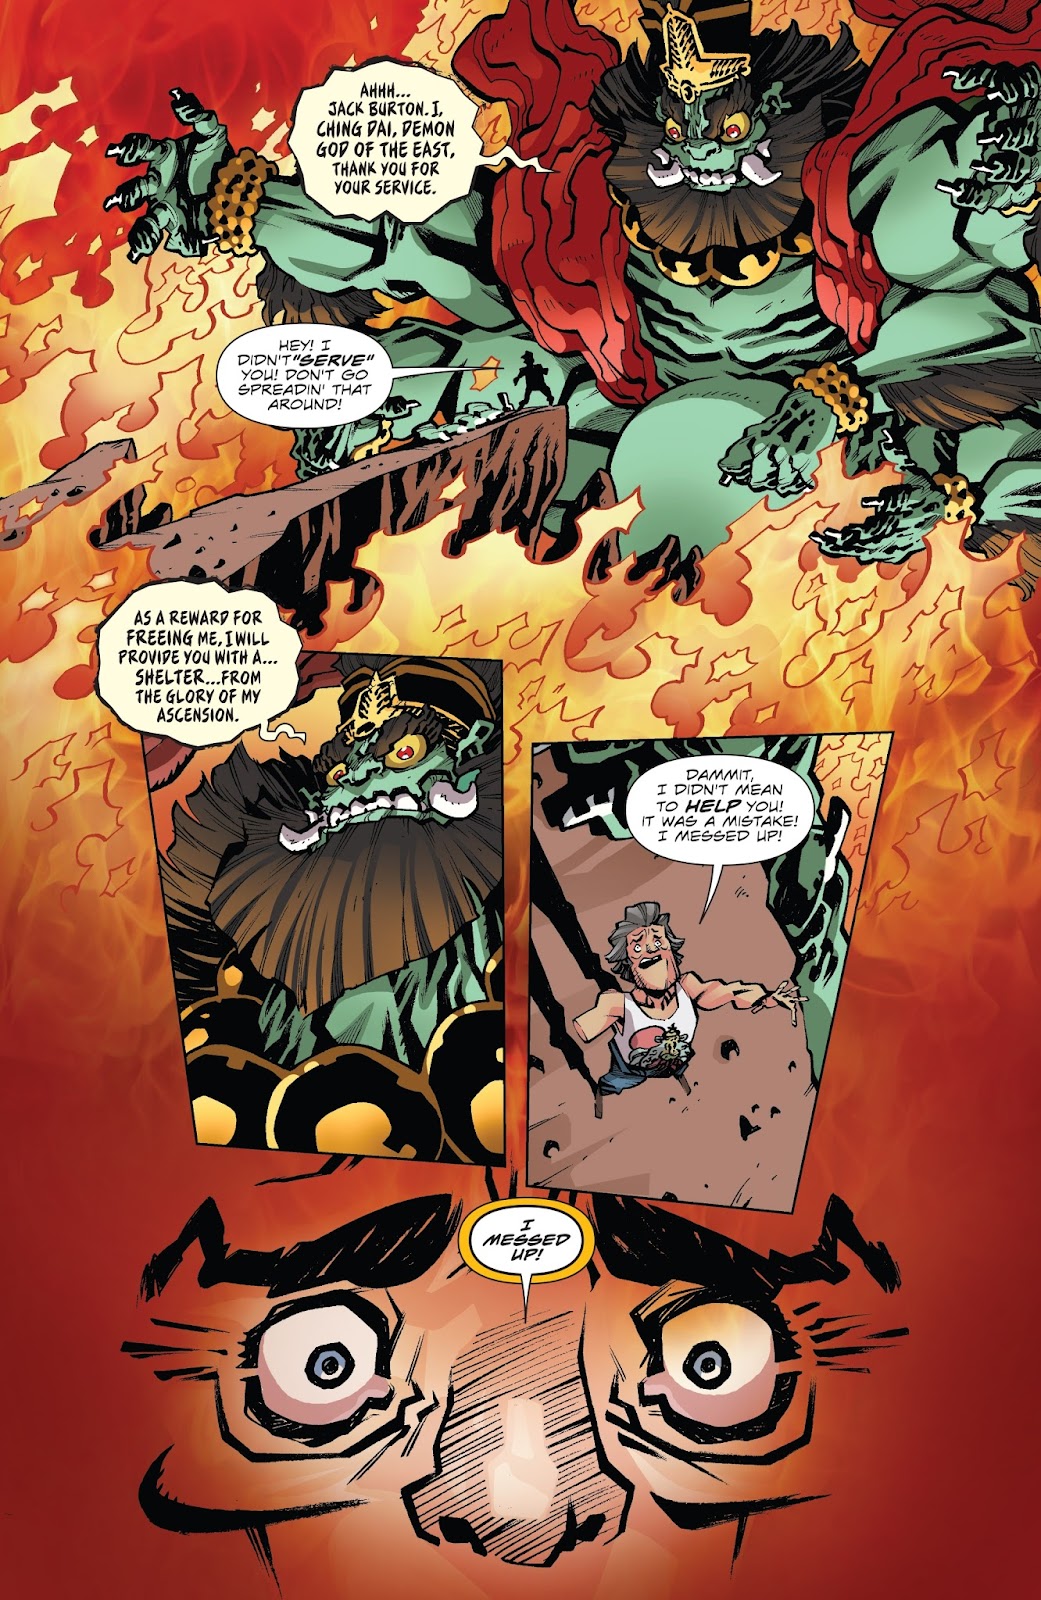 Big Trouble in Little China: Old Man Jack issue 1 - Page 7